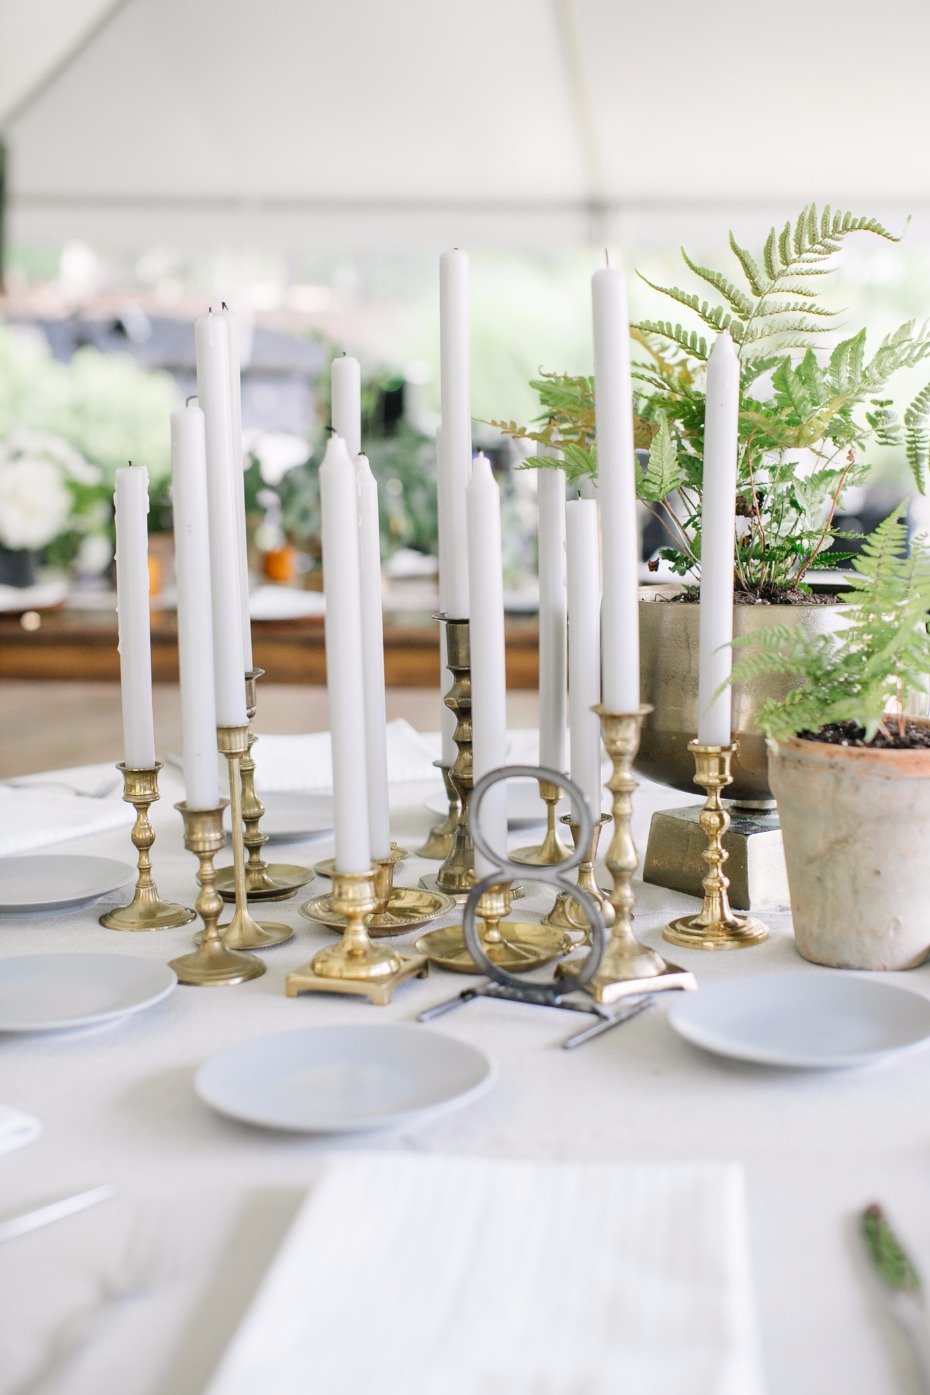 Candle sticks and potted plants centerpiece